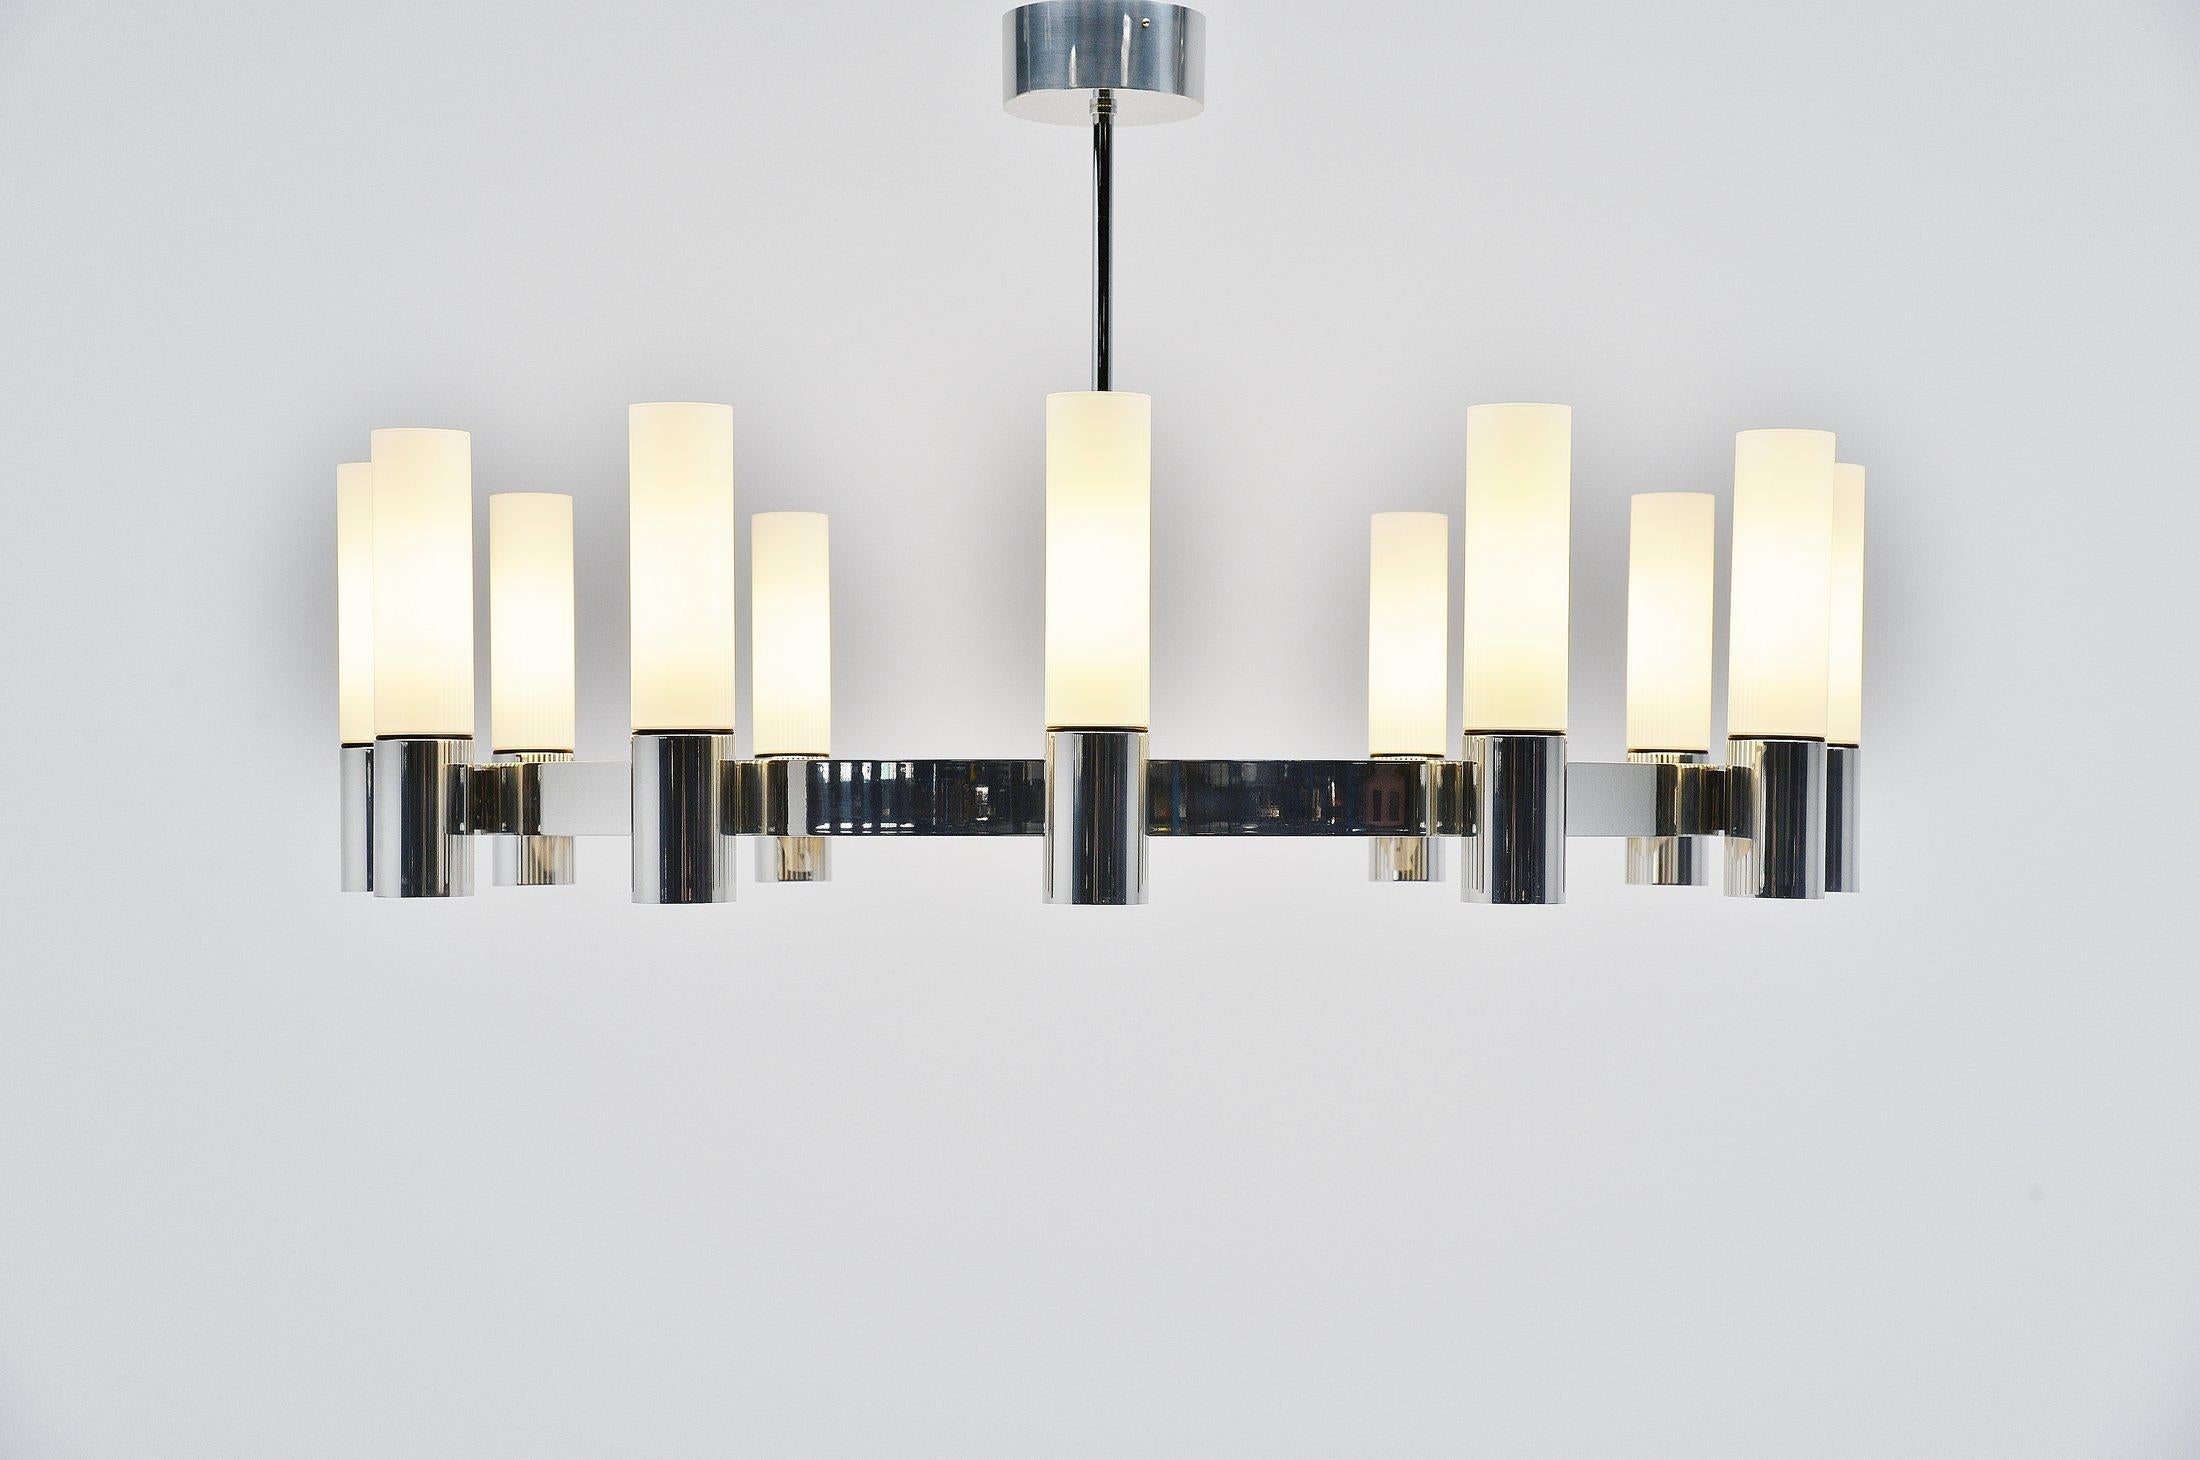 Stunning extra large chandelier designed and manufactured by Glashütte Limburg, Holland, 1970. This lamp is made of a chrome plated metal frame and has white milk glass tubular shades. This amazing large lamp has a fantastic minimalistic shape and